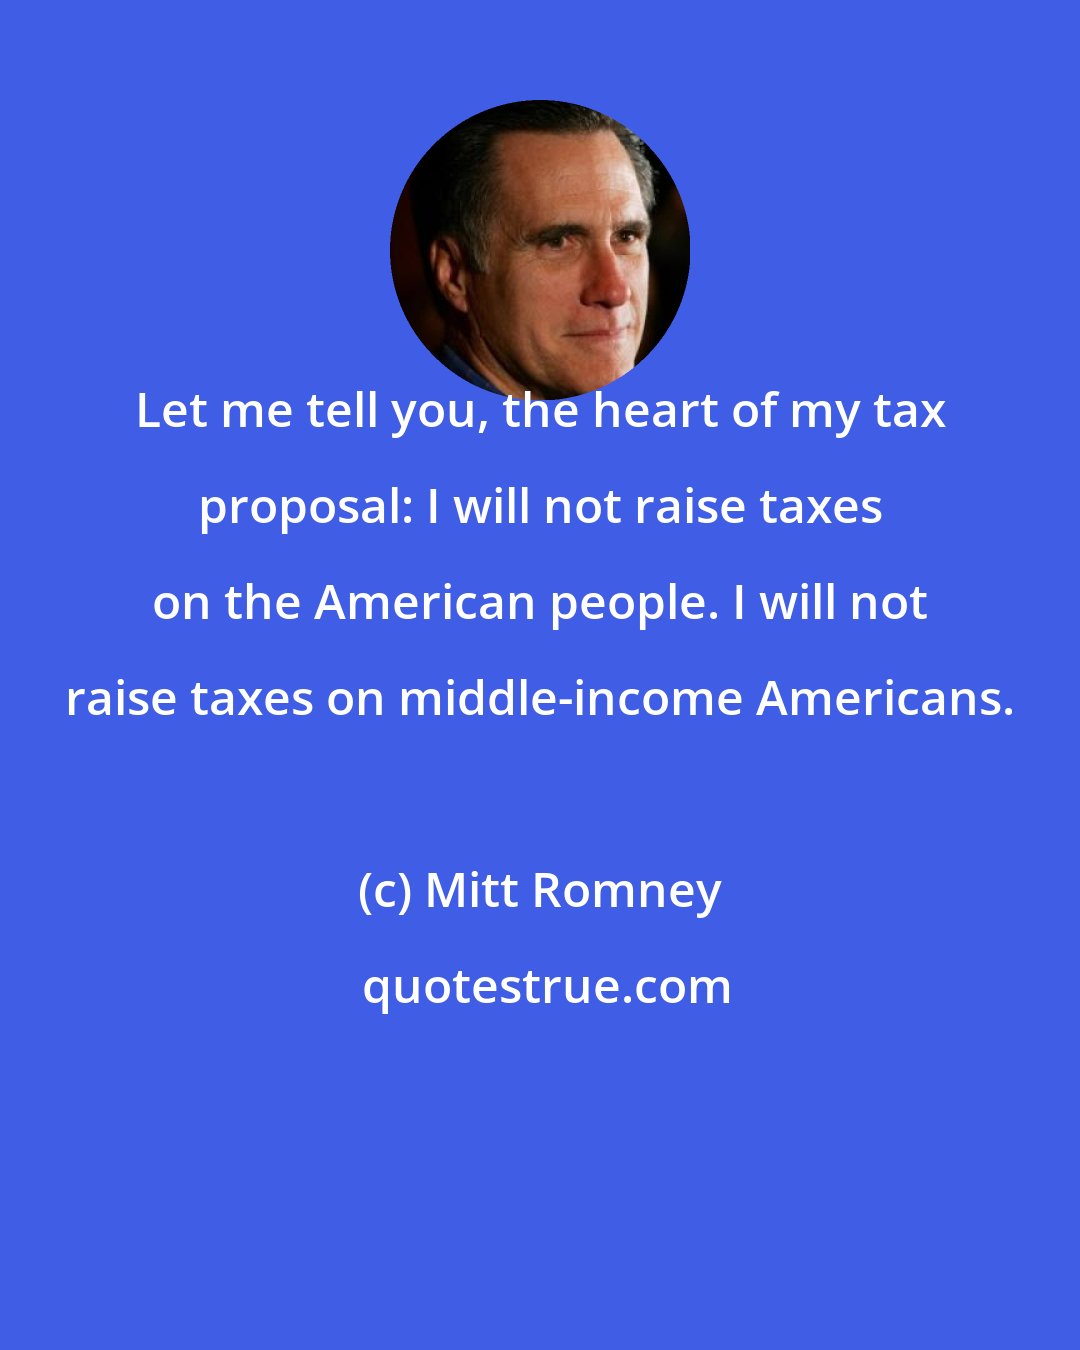 Mitt Romney: Let me tell you, the heart of my tax proposal: I will not raise taxes on the American people. I will not raise taxes on middle-income Americans.